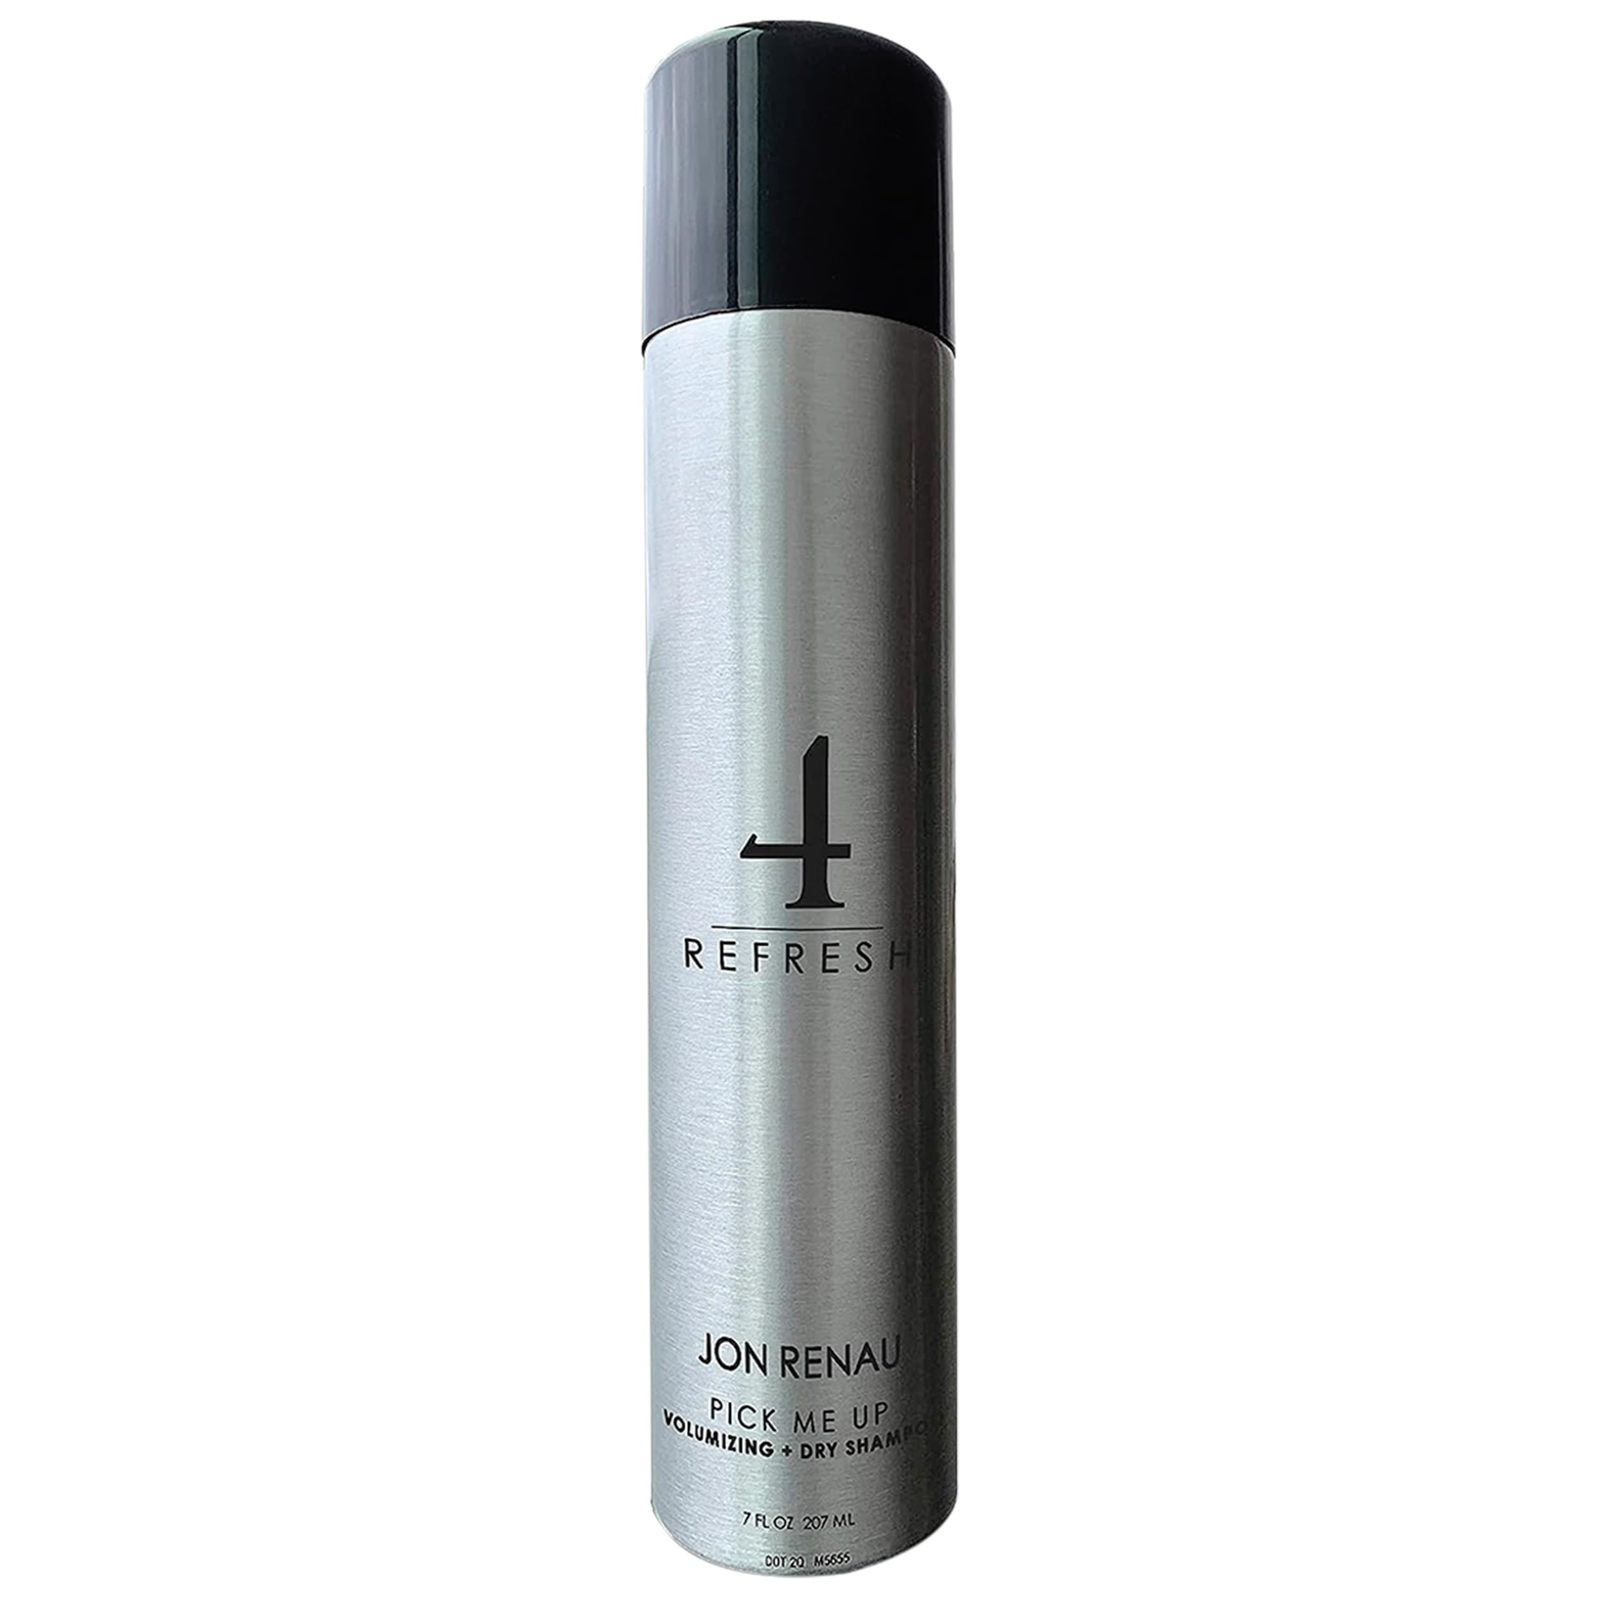 Pick Me Up Dry Shampoo and Shine Reducer For All Types of Hair by Jon Renau, 7oz - $27.90